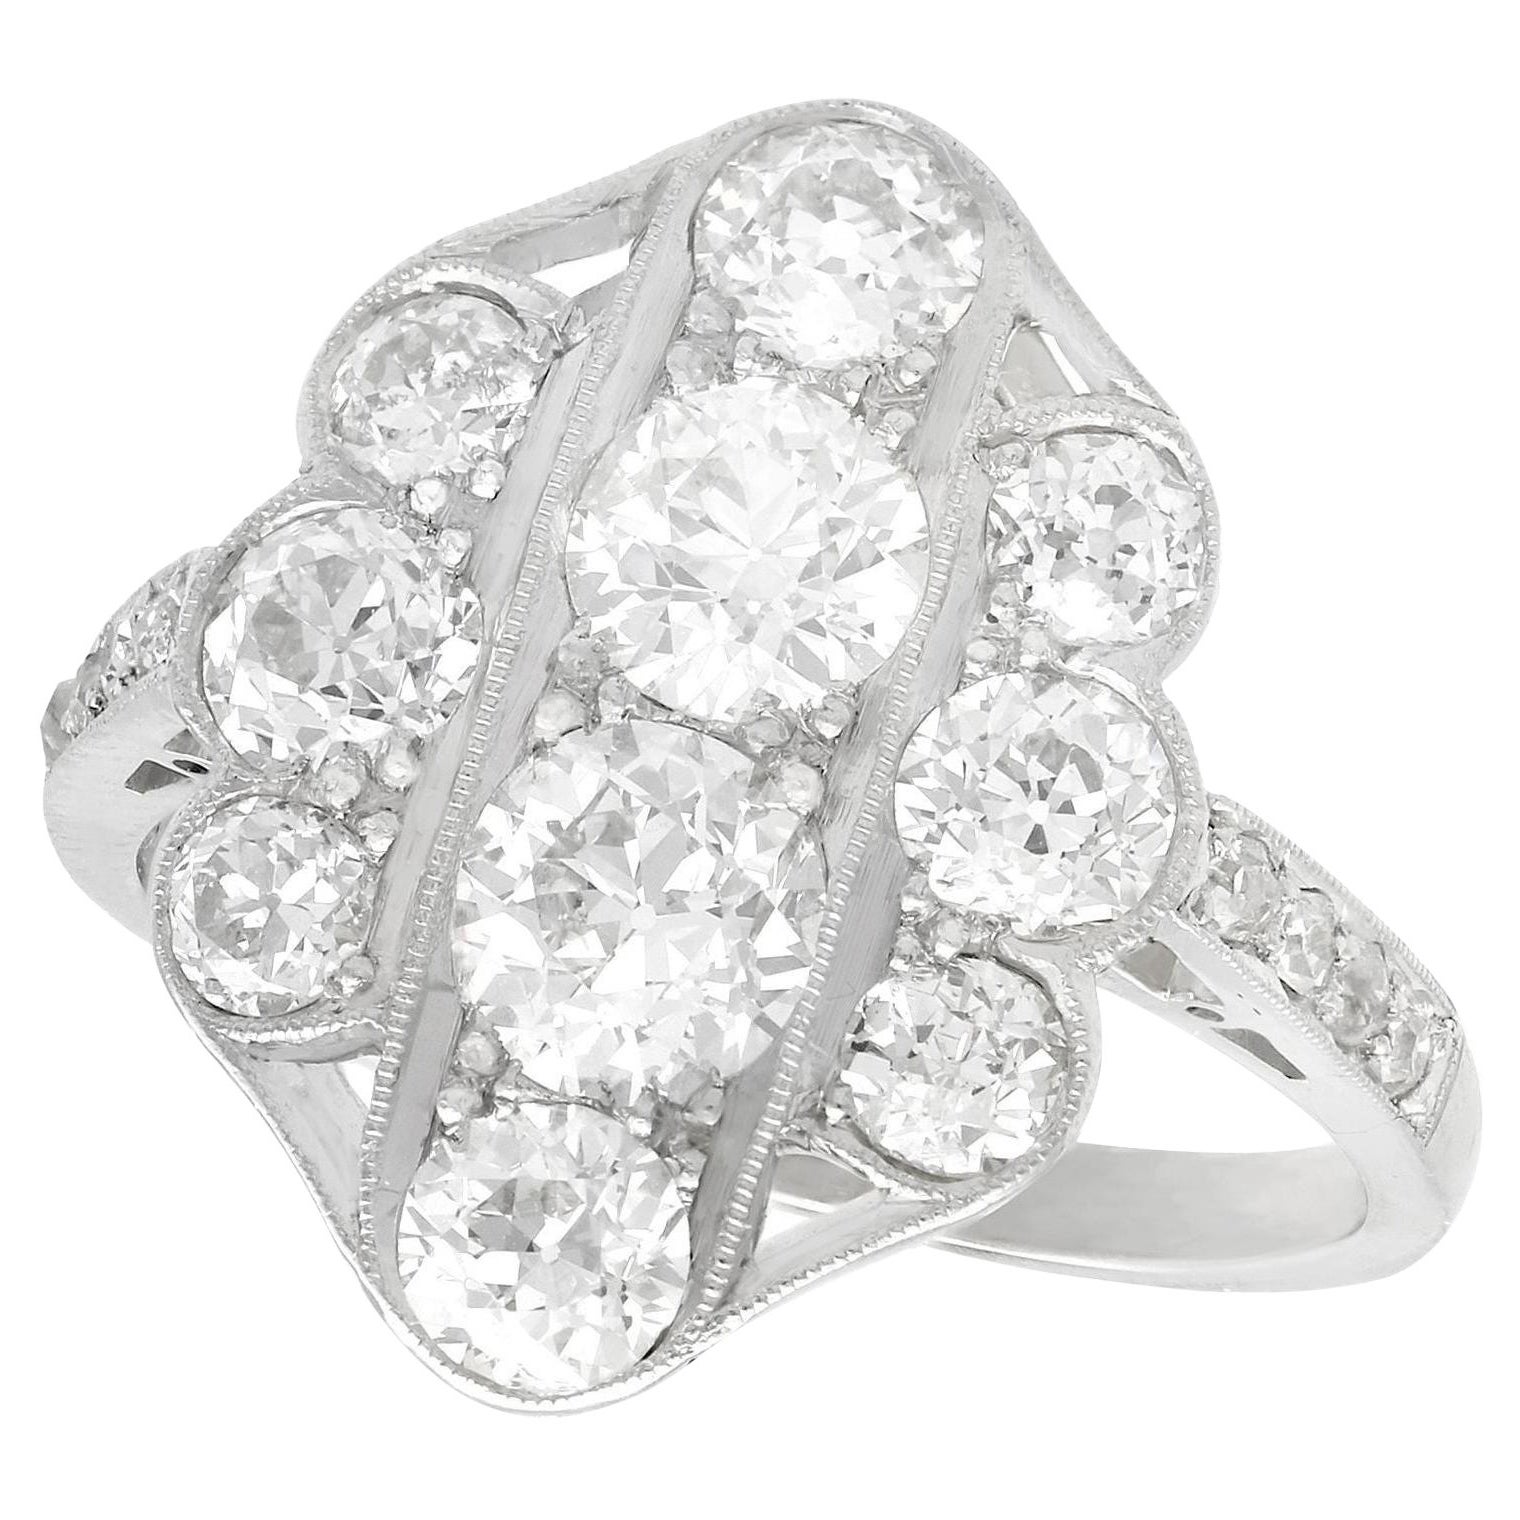 Vintage 1940s 2.85 Carat Diamond and White Gold Cocktail Ring For Sale